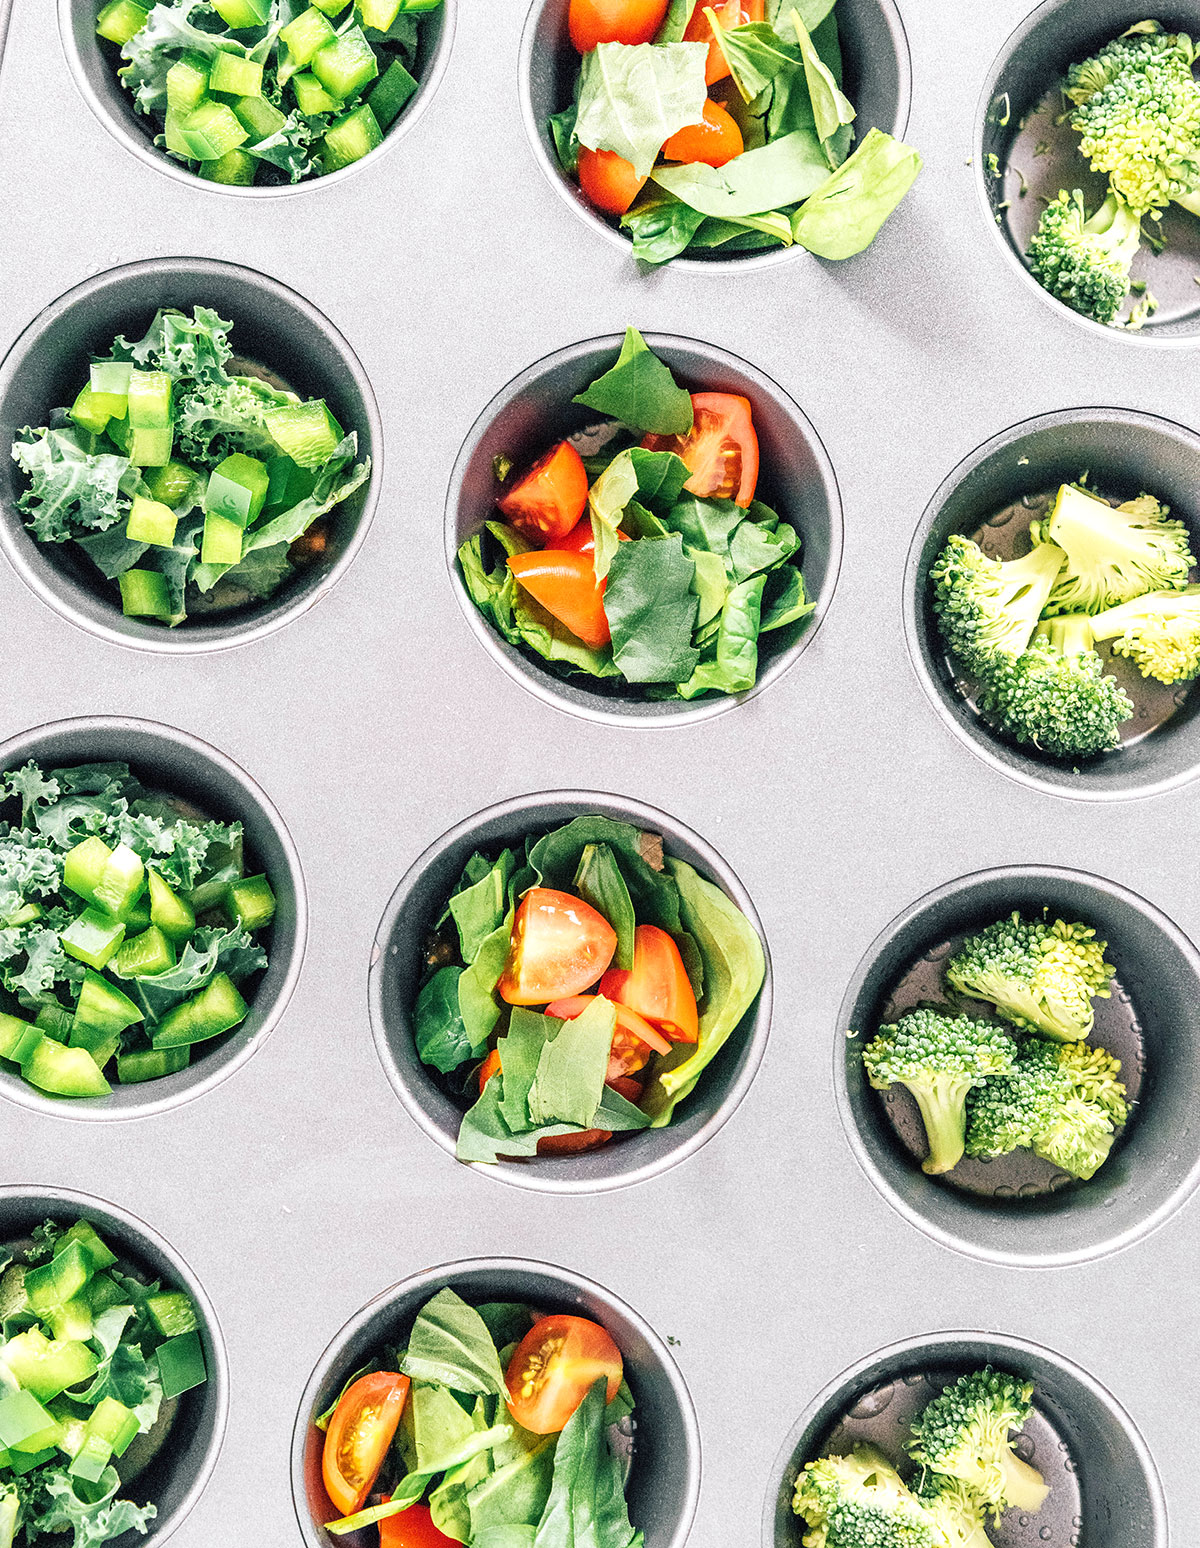 Muffin tin filled with veggies